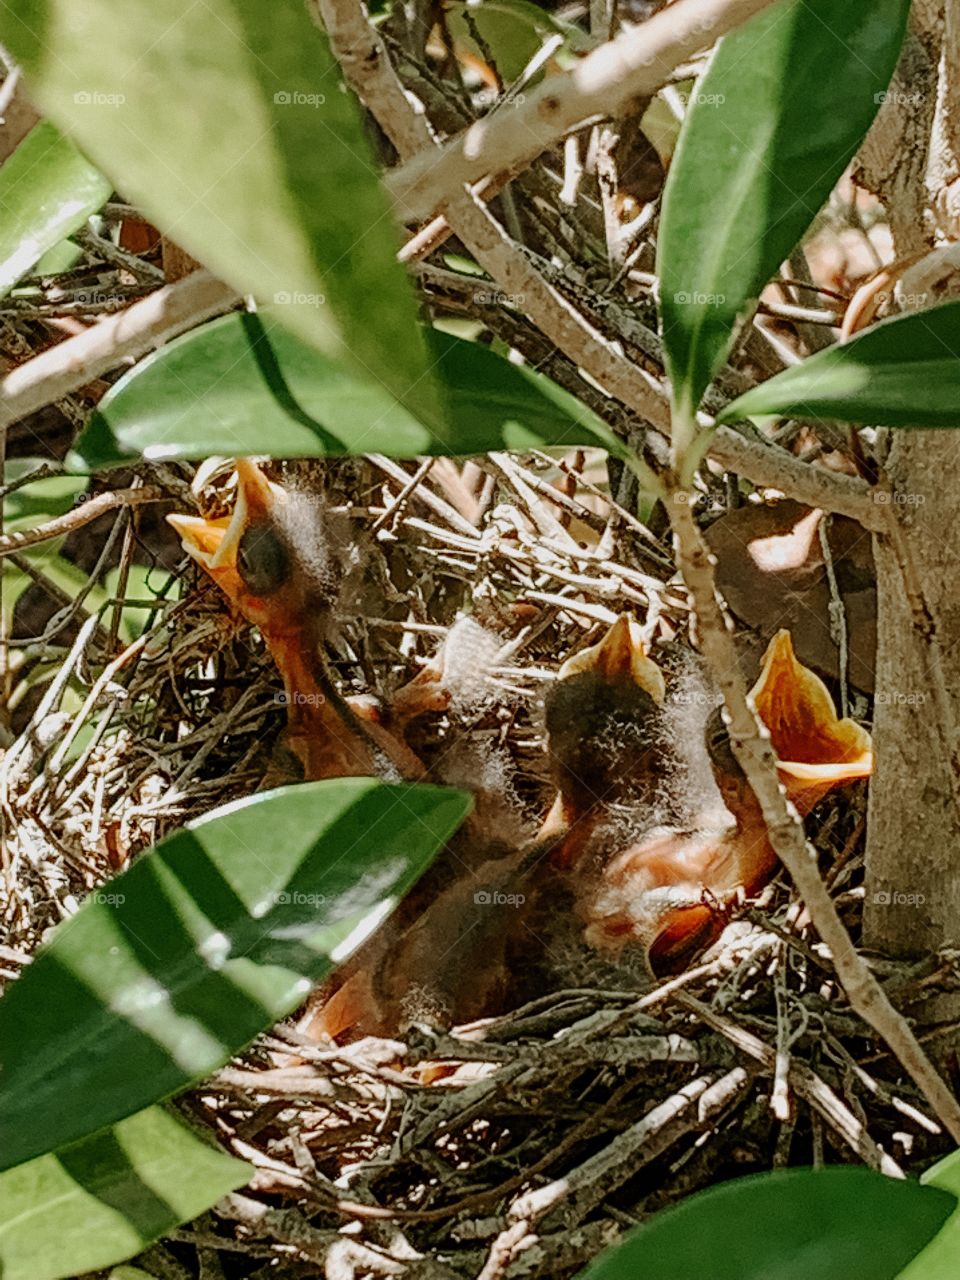 3 baby mockingbirds in a nest waiting for food